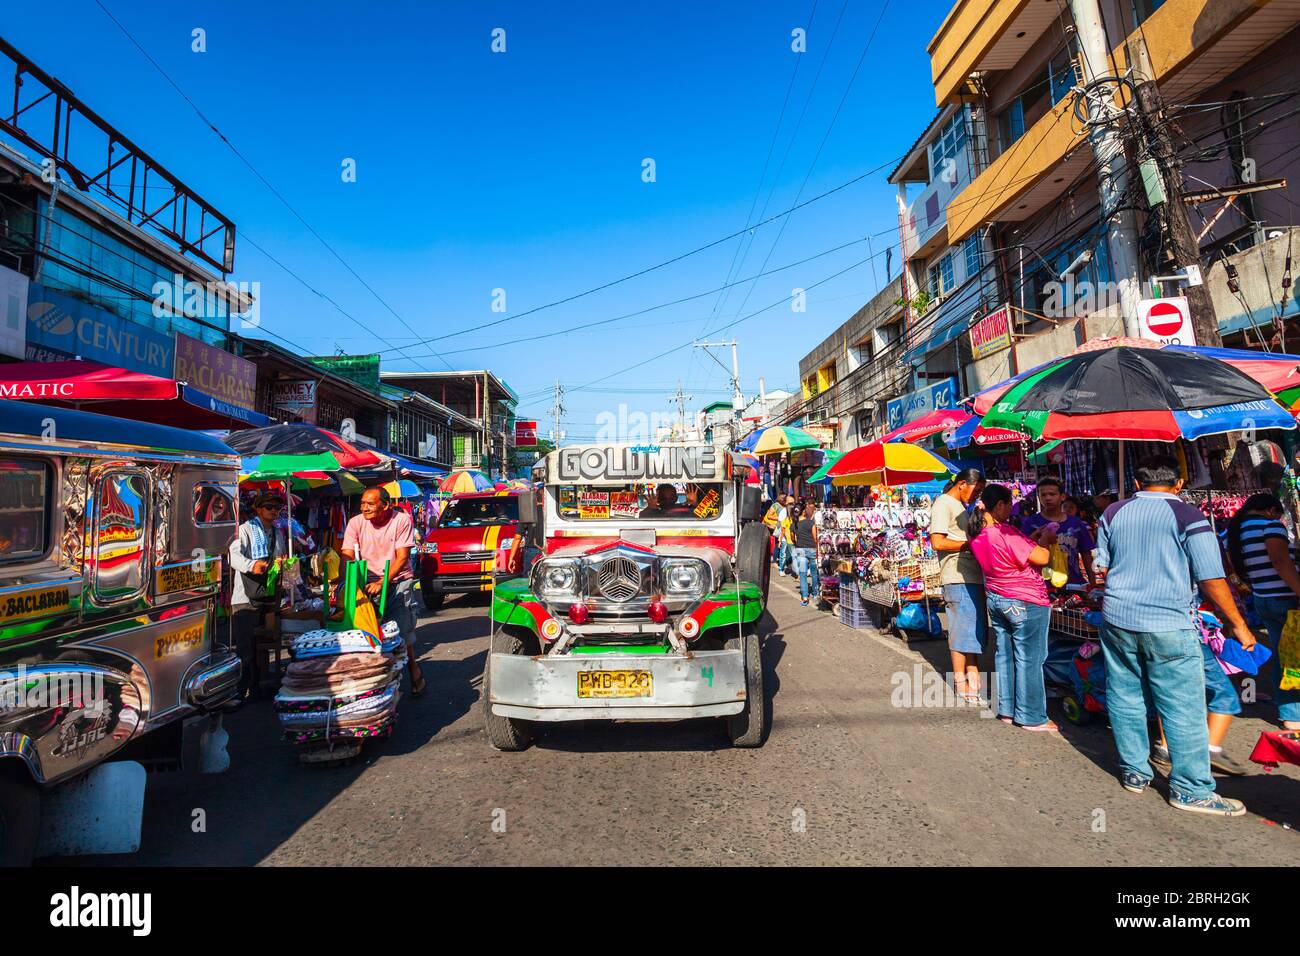 MANILA, PHILIPPINES - MARCH 17, 2013: Jeepneys are popular public transport in the Manila city in Philippines, they made from old US military jeeps Stock Photo